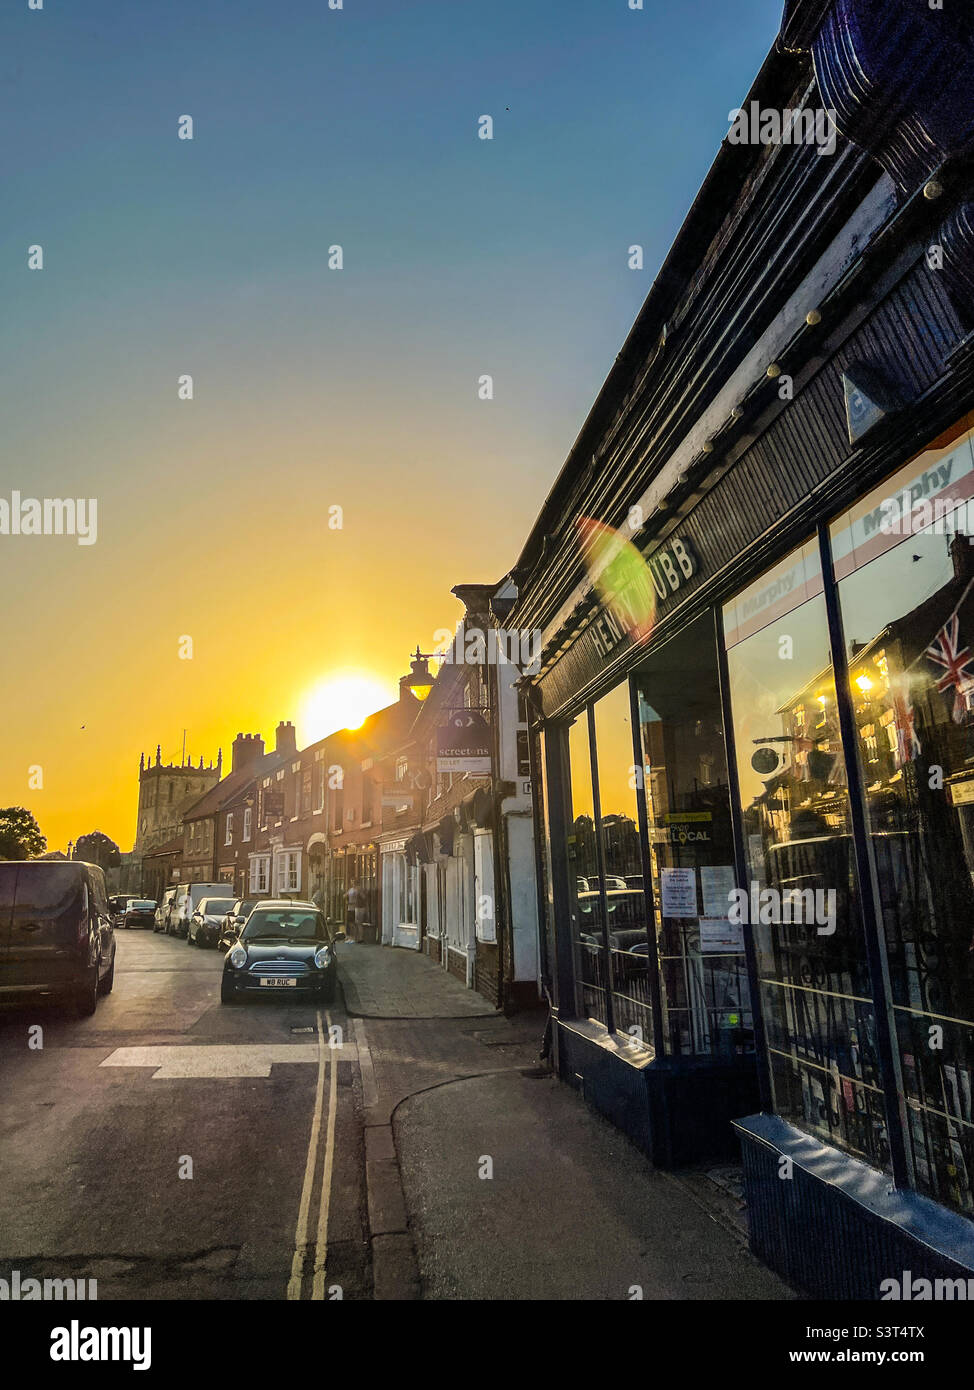 Sunset on historic market town of Snaith in East Yorkshire Stock Photo